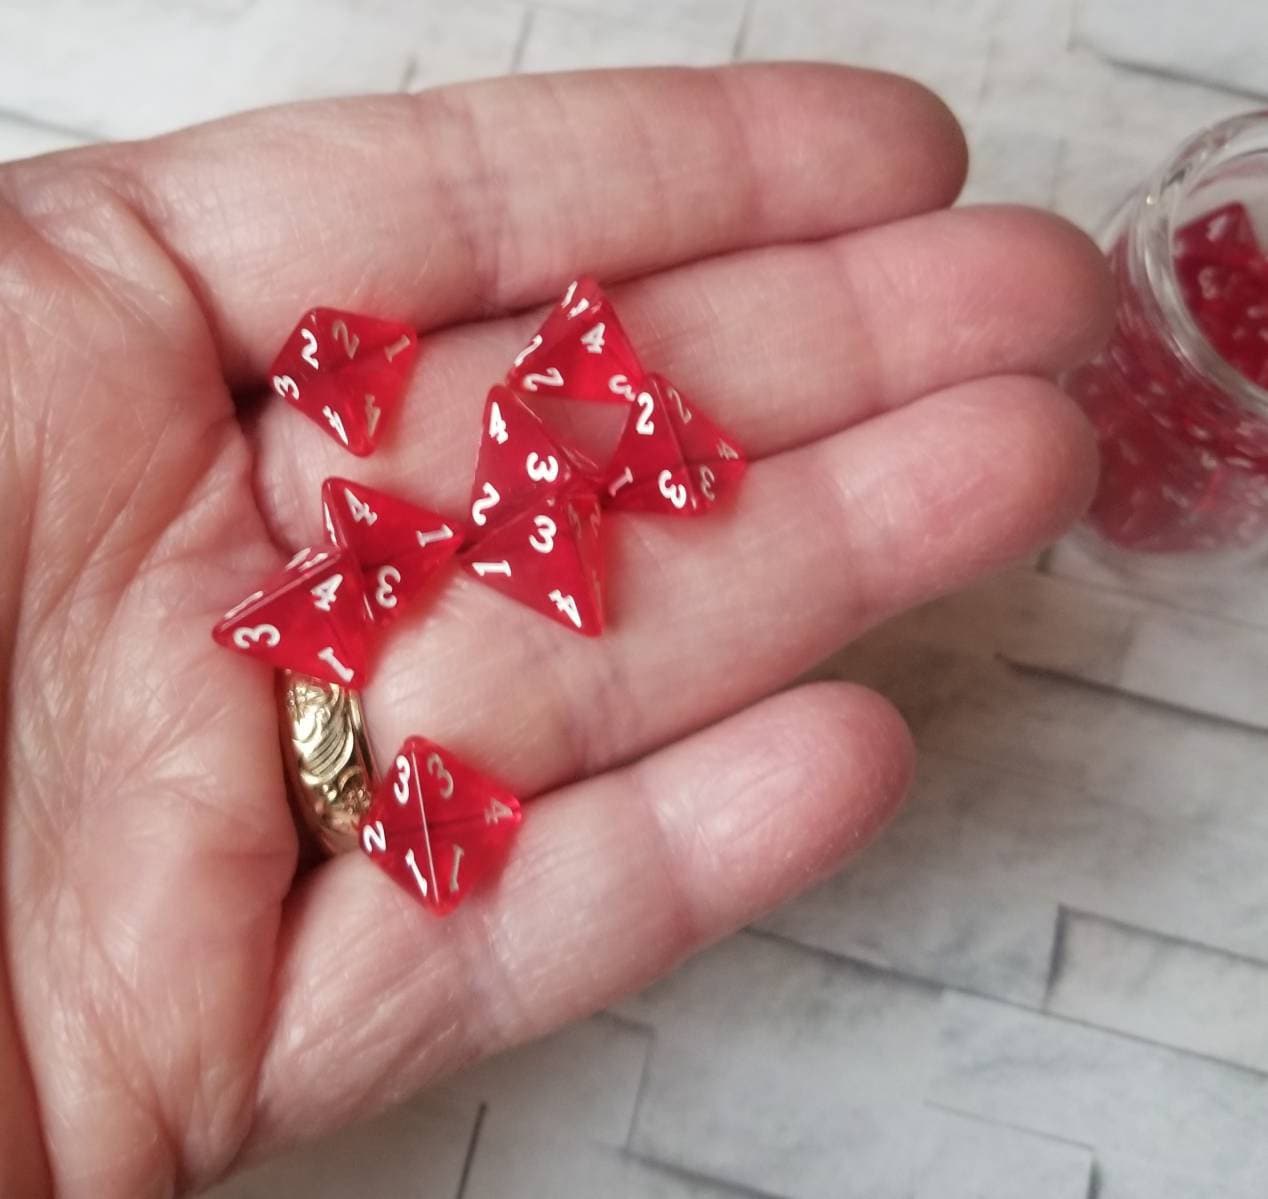 stege Socialisme Beskatning Individual 10mm d4 dnd die, mini red translucent d4 dice, mini polyhedral  dice, DnD dice, D and D dice, 10mm red d4s for healing potions